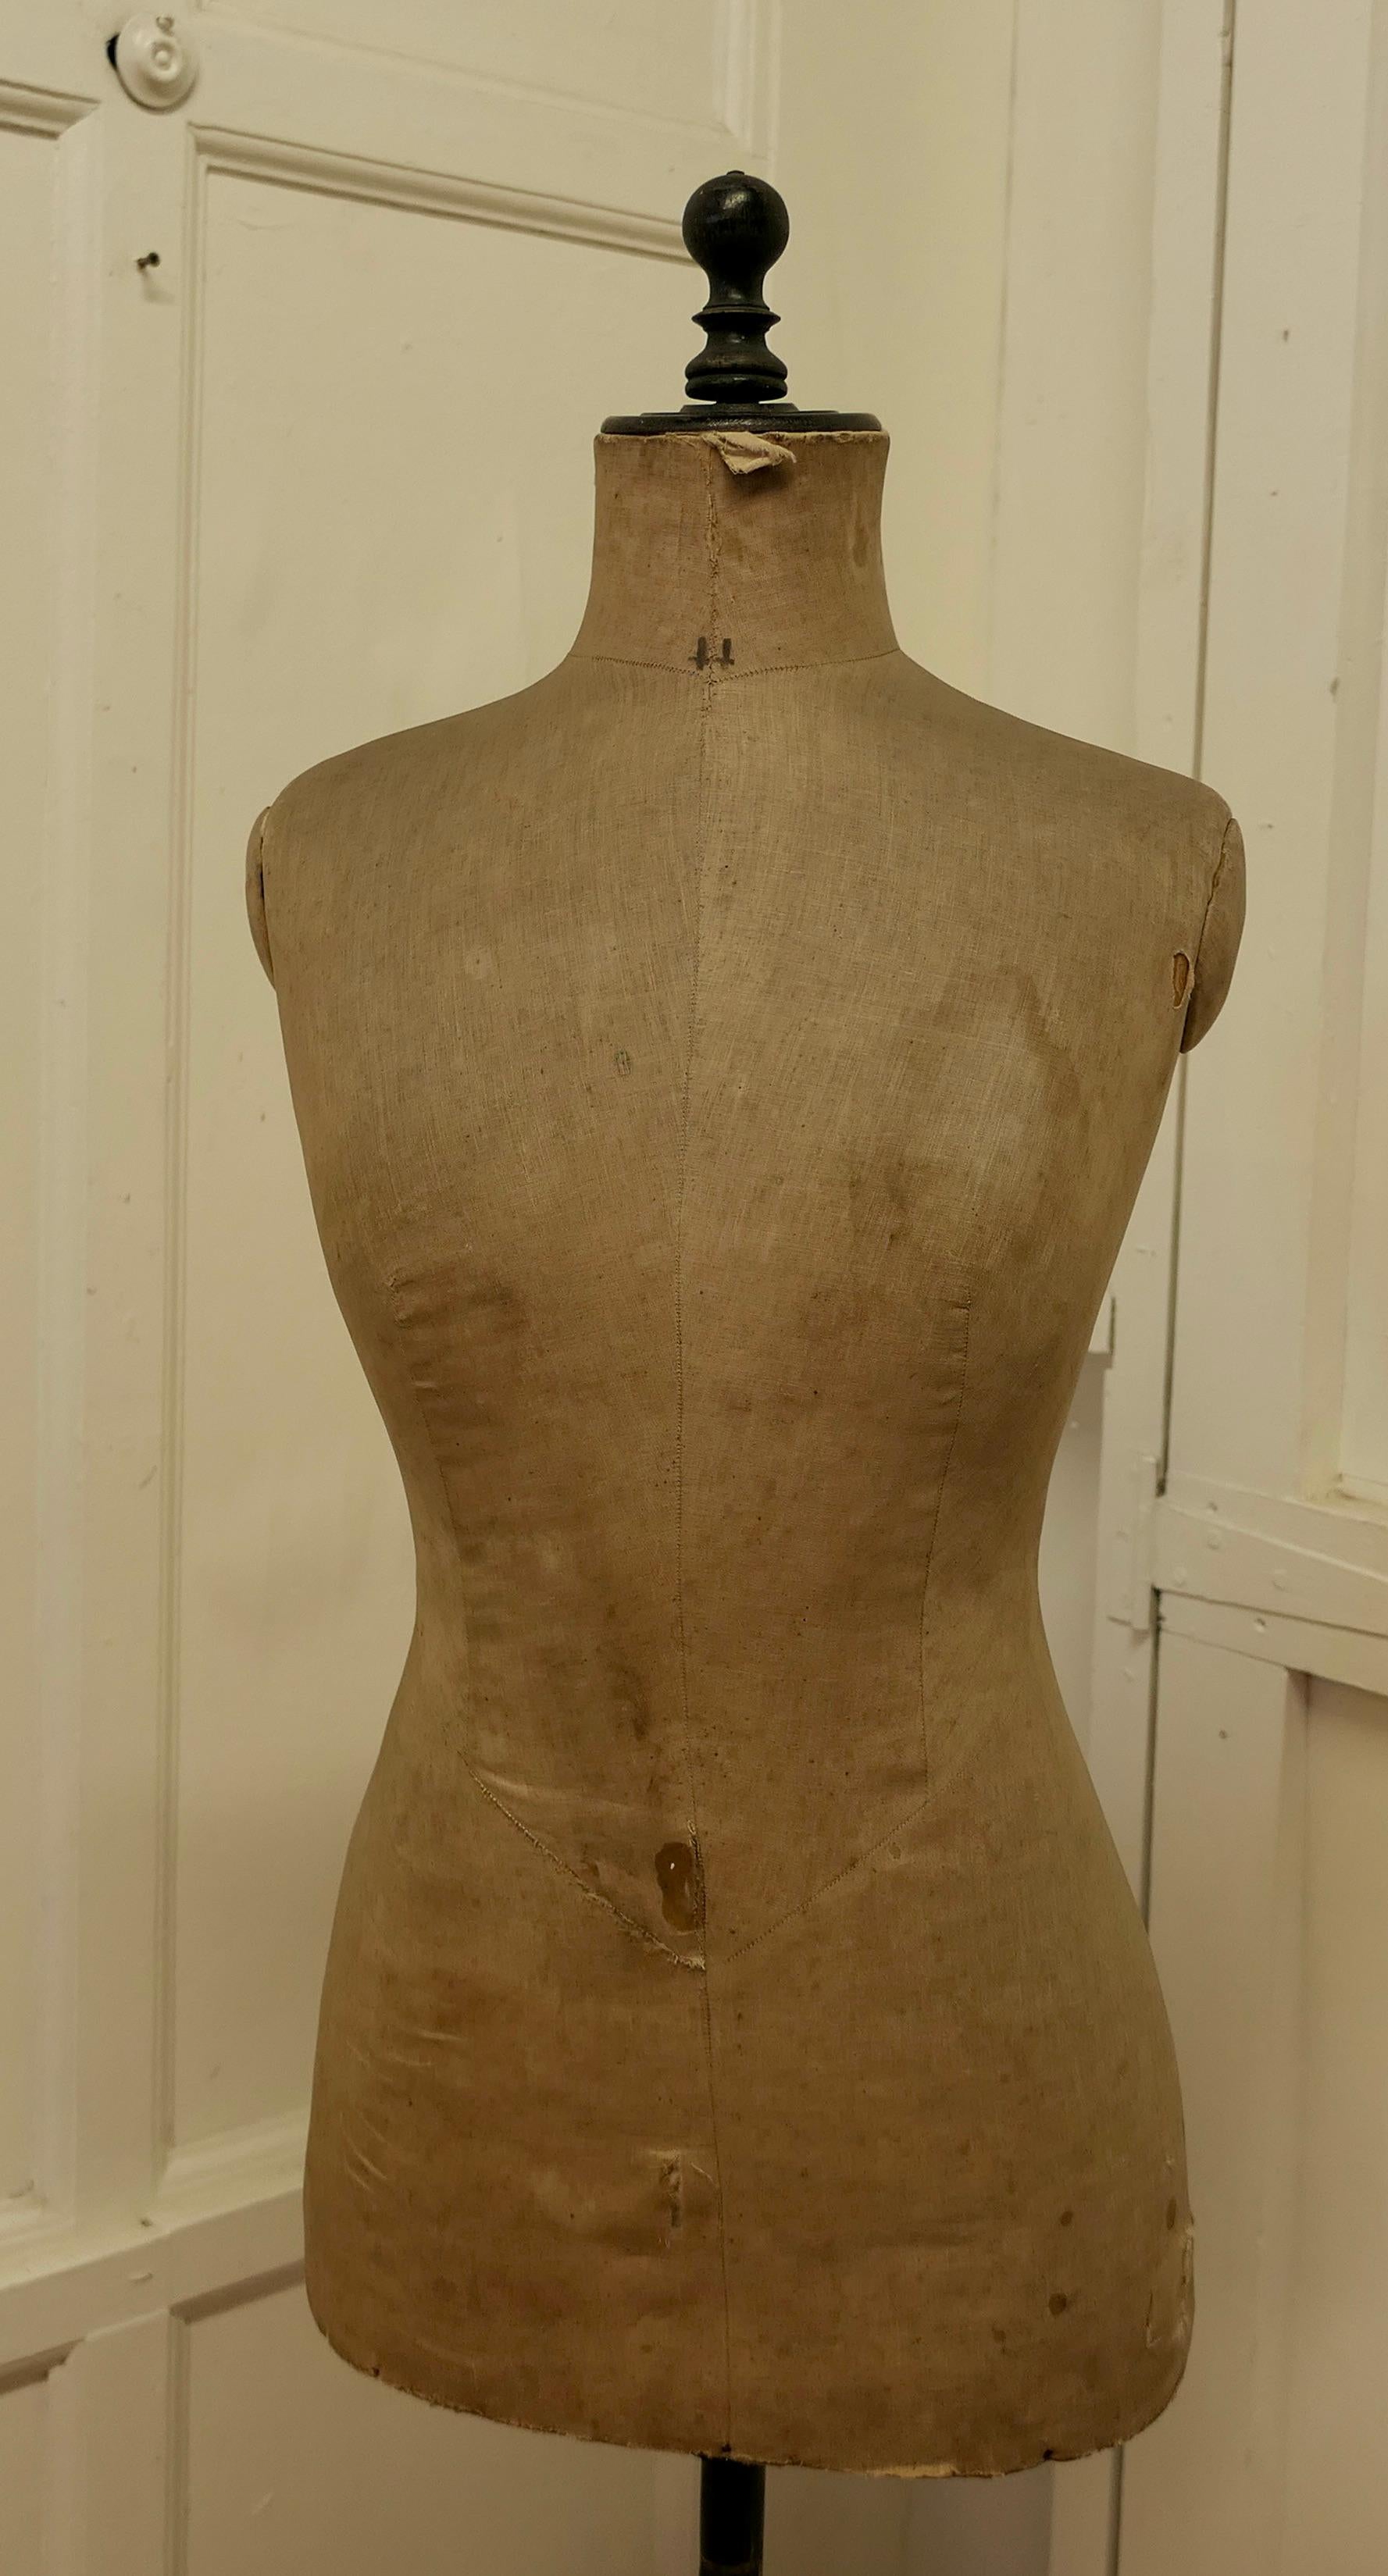 A vintage French Mannequin 

The Mannequin or Tailors Dummy, dates from around 1900 the mannequin is in original condition, the age darkened linen is slightly tatty and the Stand has little woodworm, this has been killed
The Dummy stands 61”